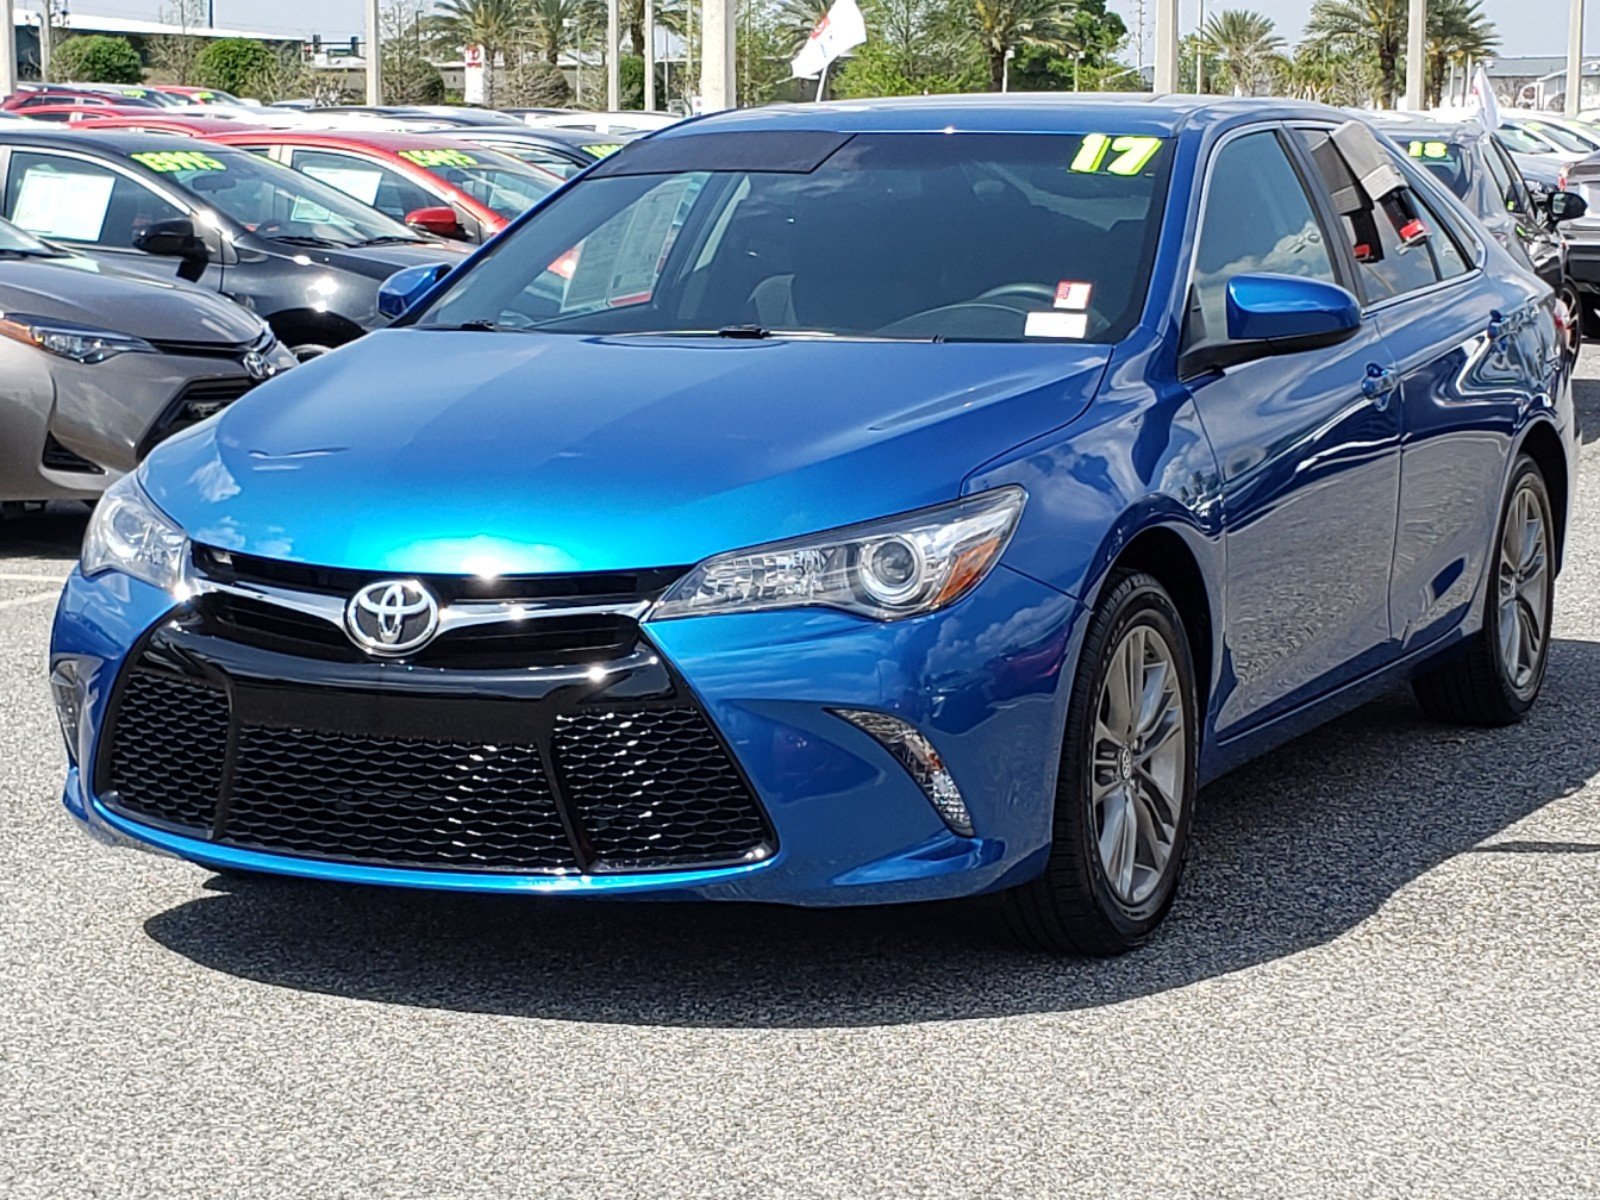 Certified Pre-Owned 2017 Toyota Camry SE 4dr Car in Orlando #0250375A ...